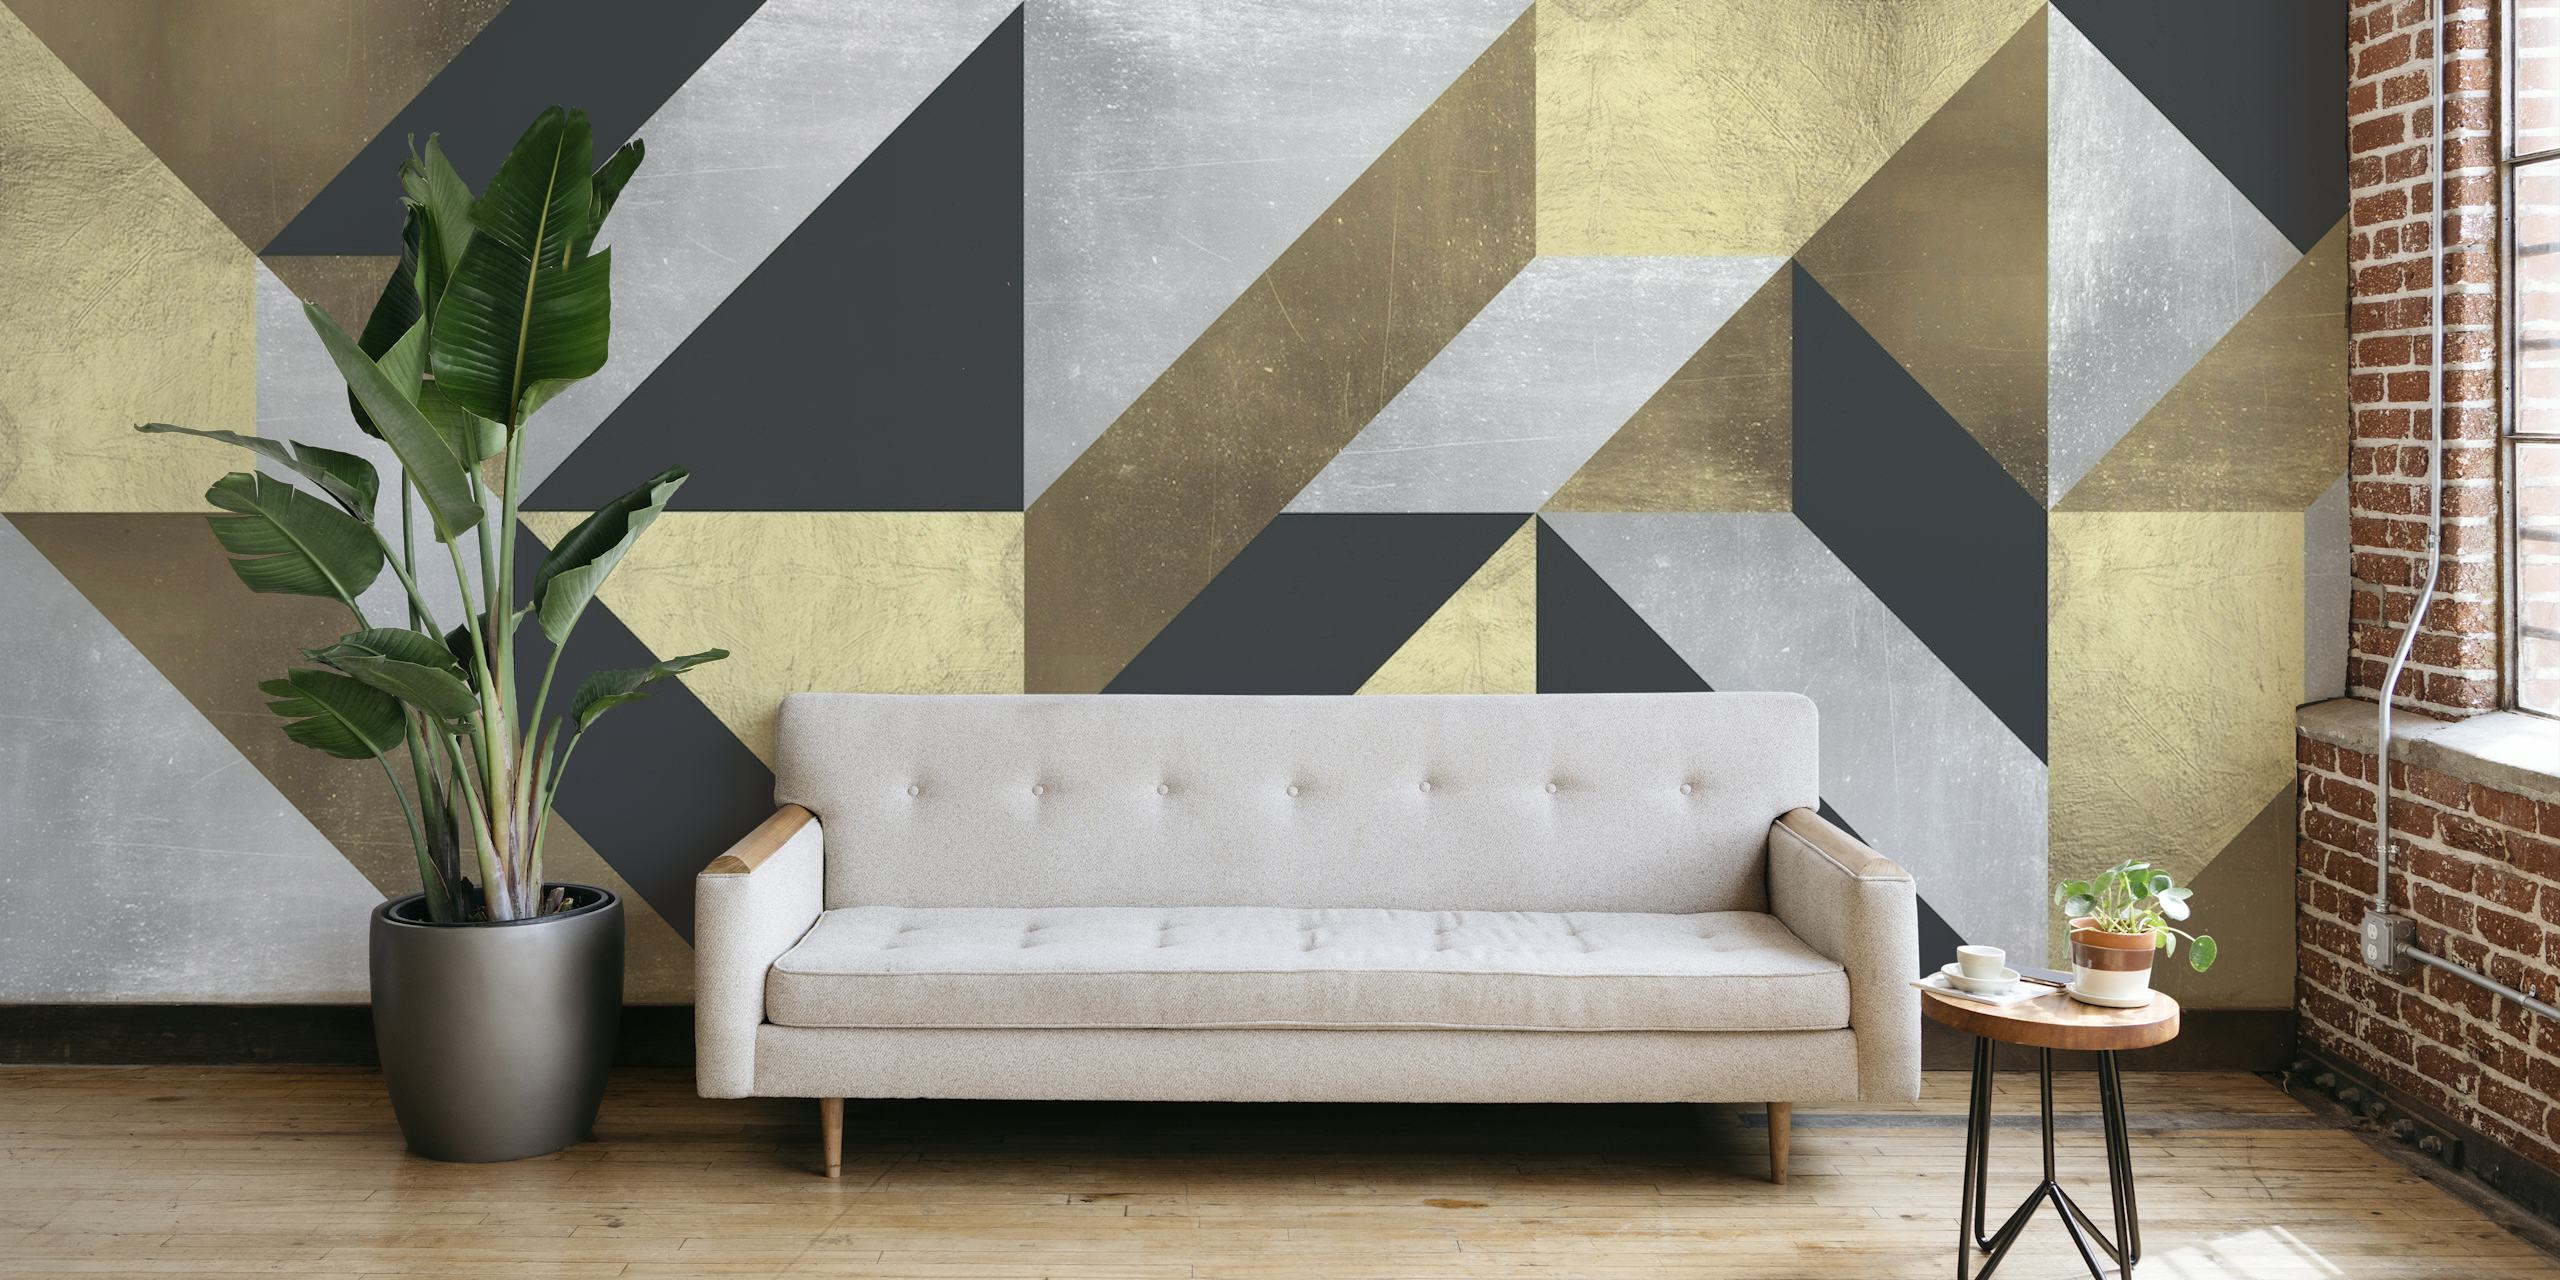 Geometric wall mural with gold, black, and metallic patterns